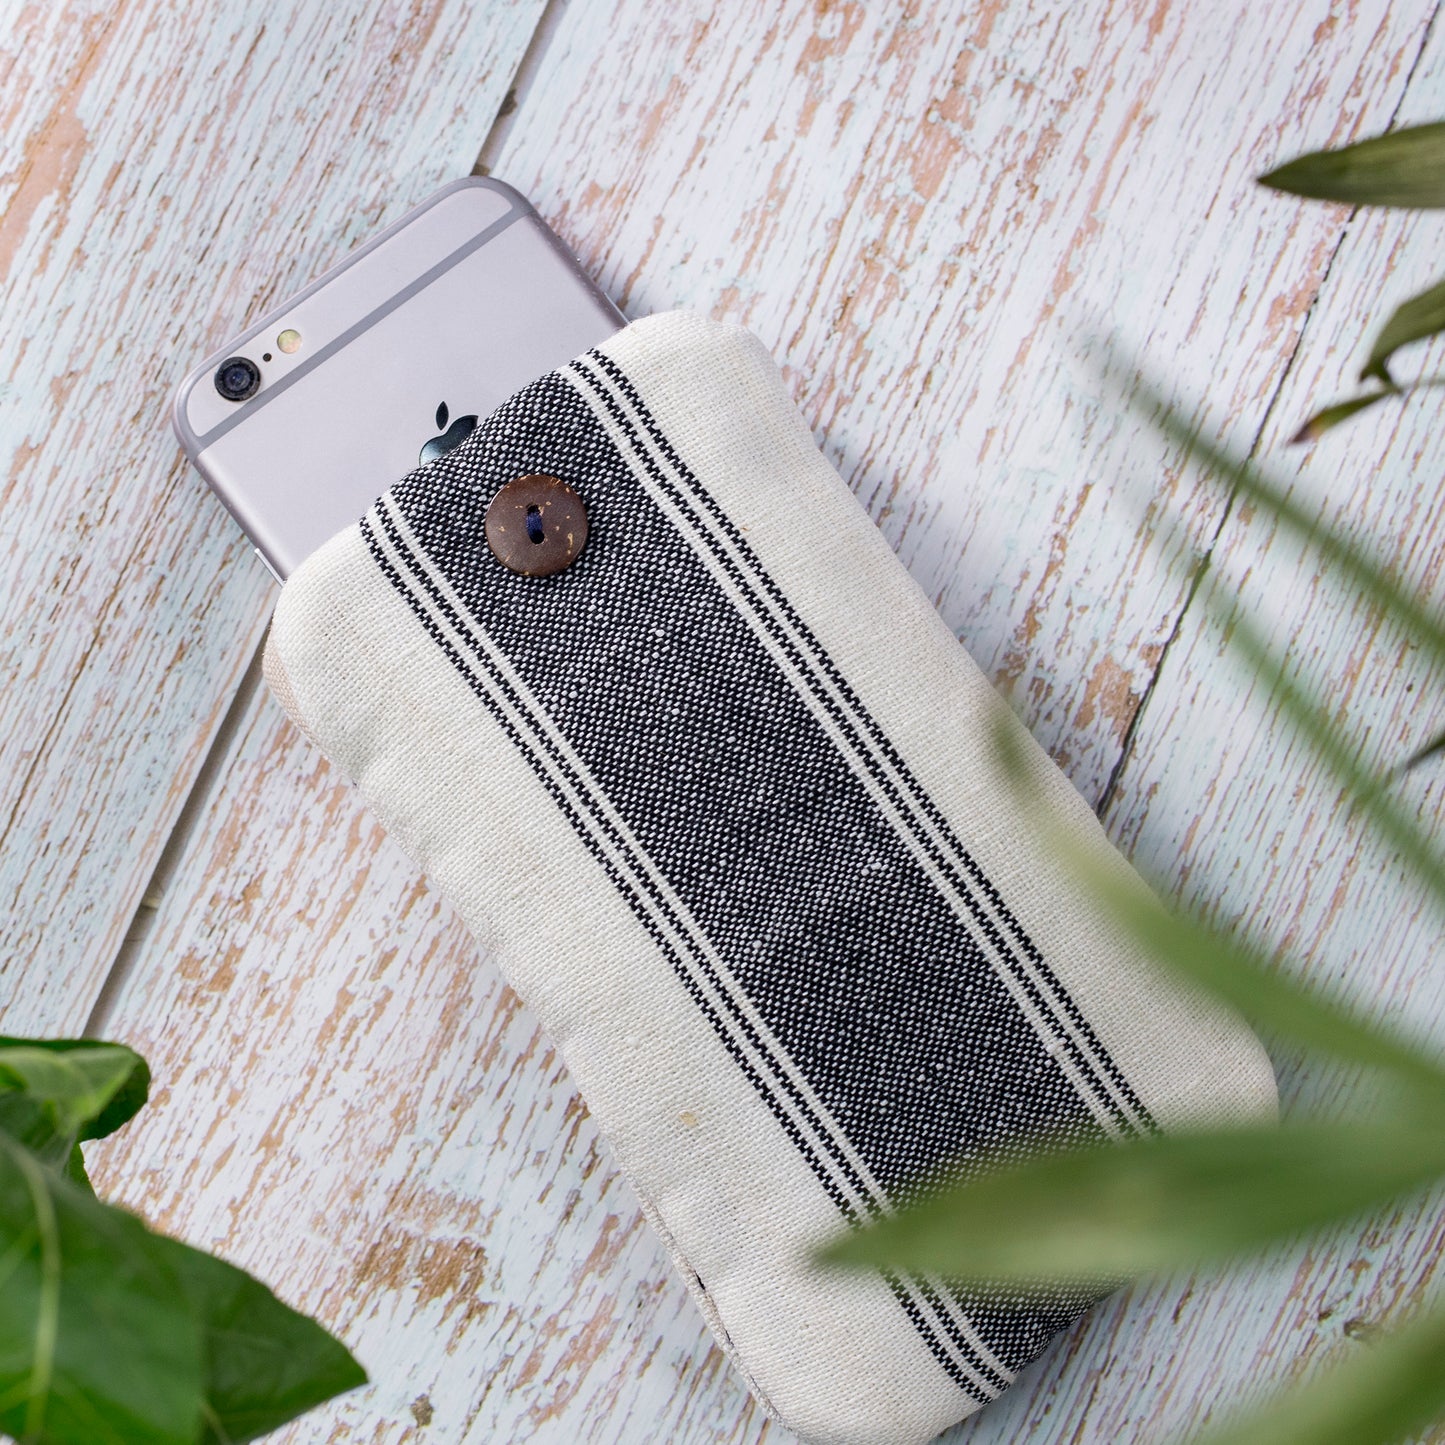 Phone case/glass case, handwoven H'mong fabric in black and white stripes, shock absorption layer